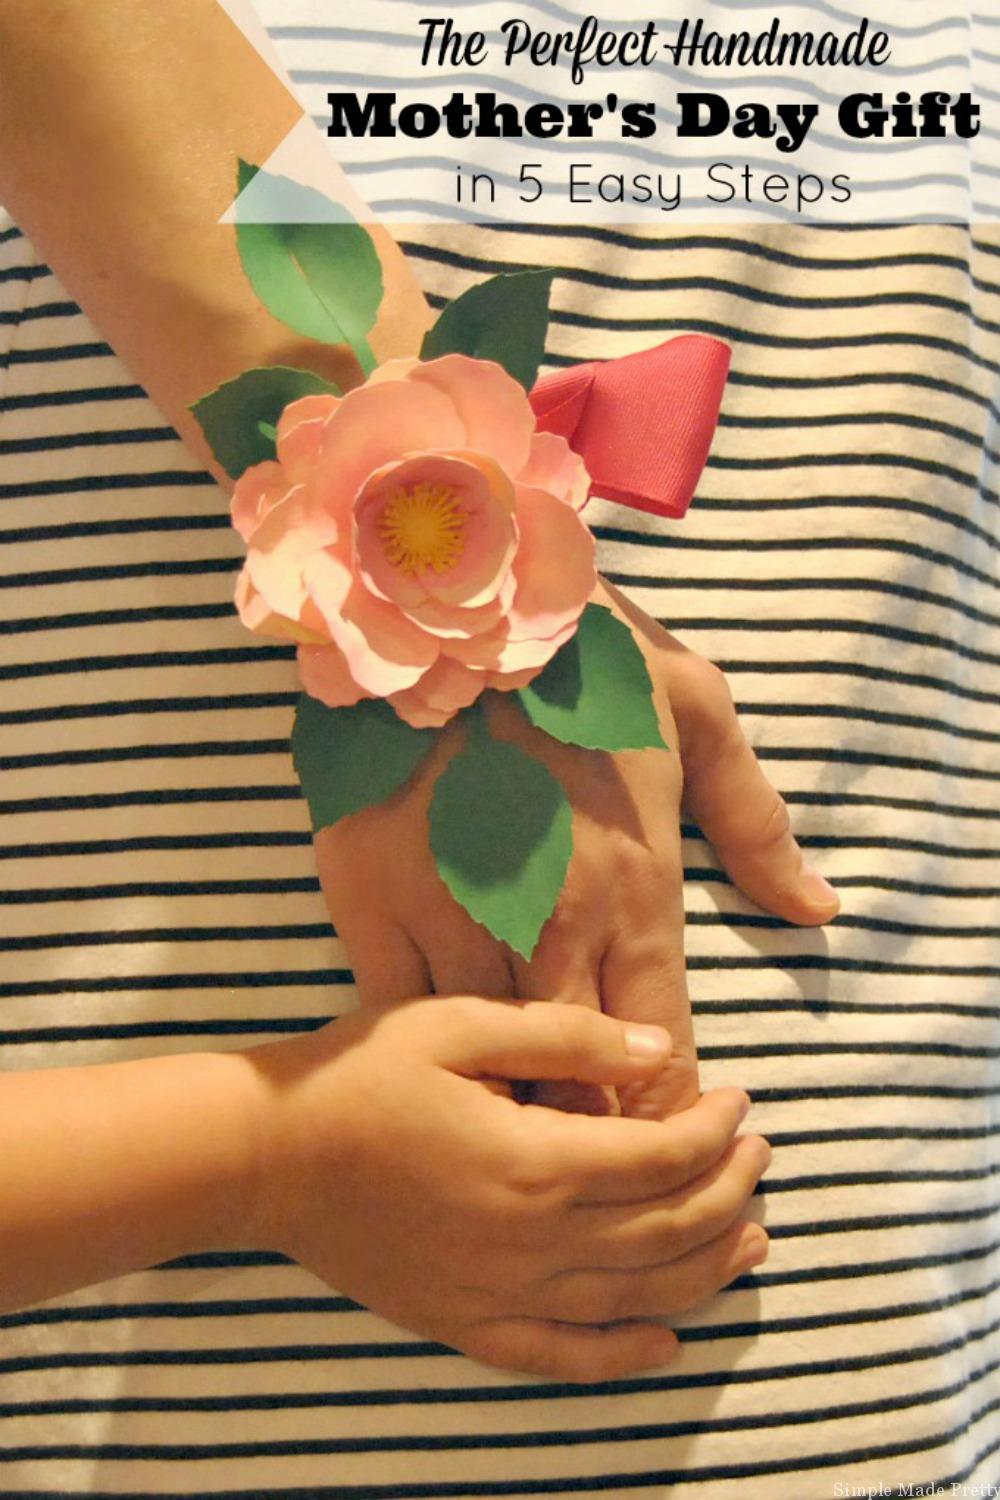 Want to make Mother's Day extra special this year? Try making this Mother's Day flower corsage keepsake! We've included a tutorial below along with a free flower template so you can make one for the women in your life in 5 easy steps! This project is also very kid friendly - moms love receiving handmade gifts from their children!